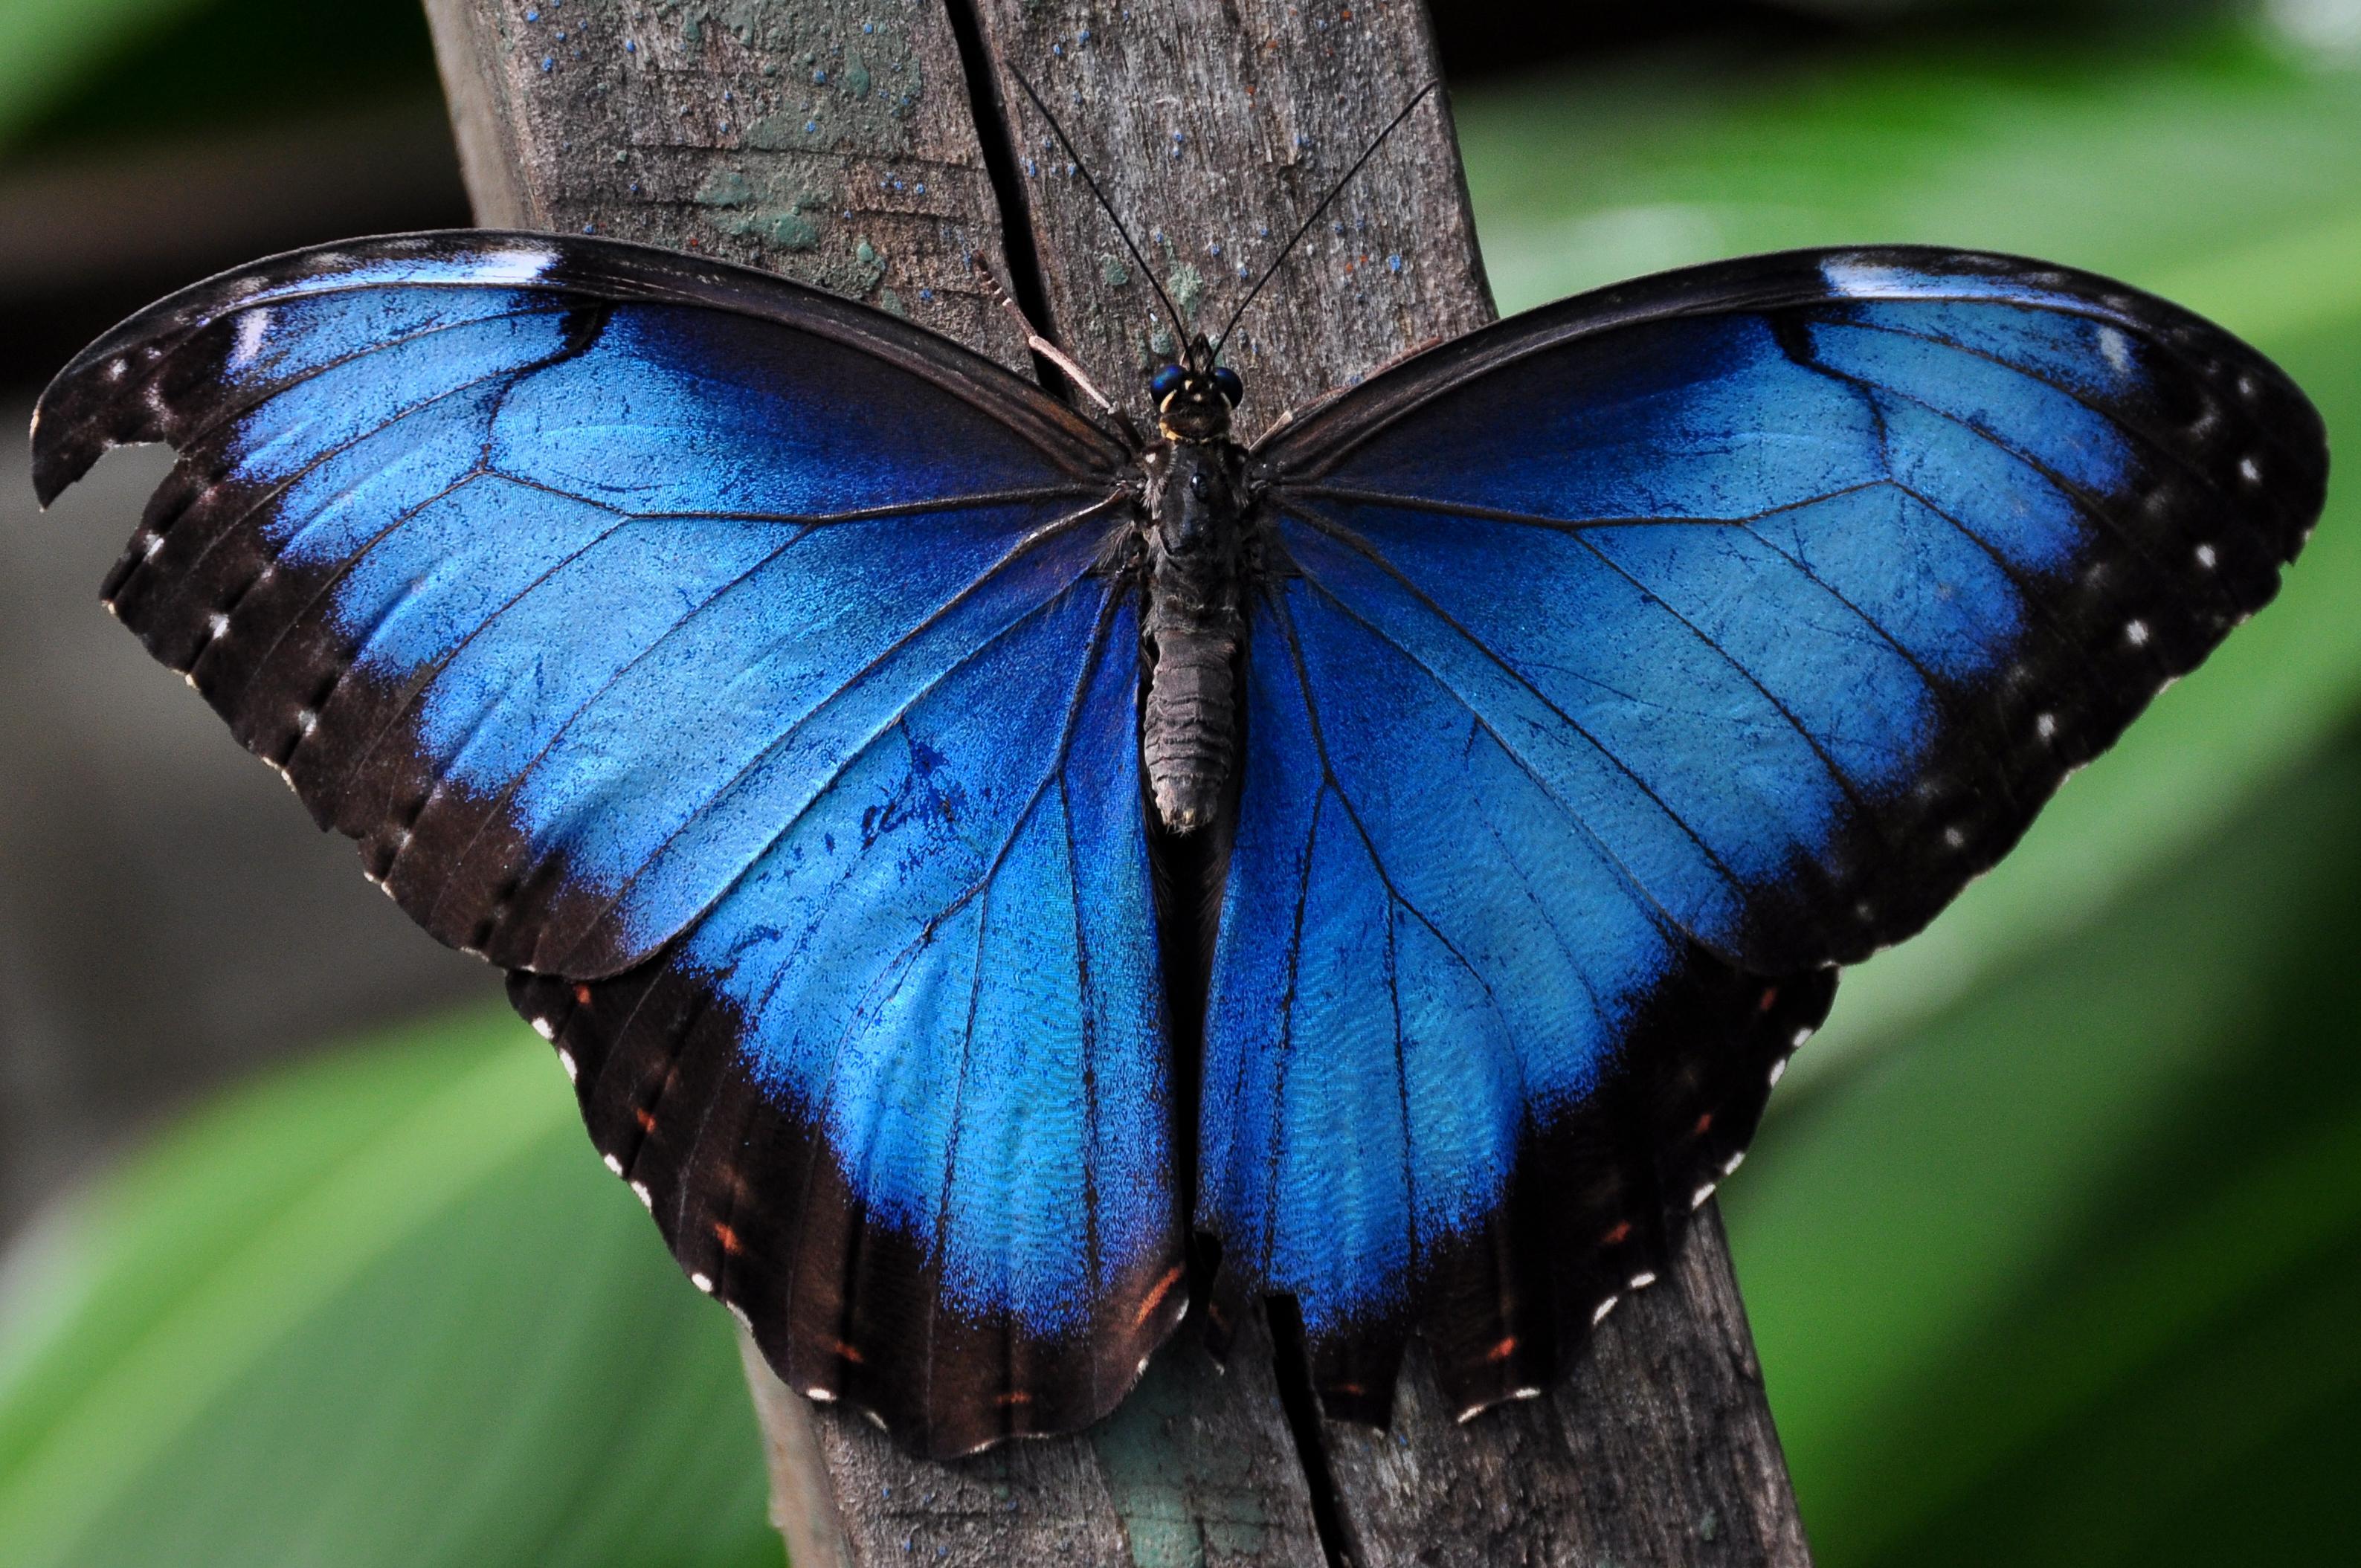 Colorful 【Butterfly】HD Free Image Wallpaper Download